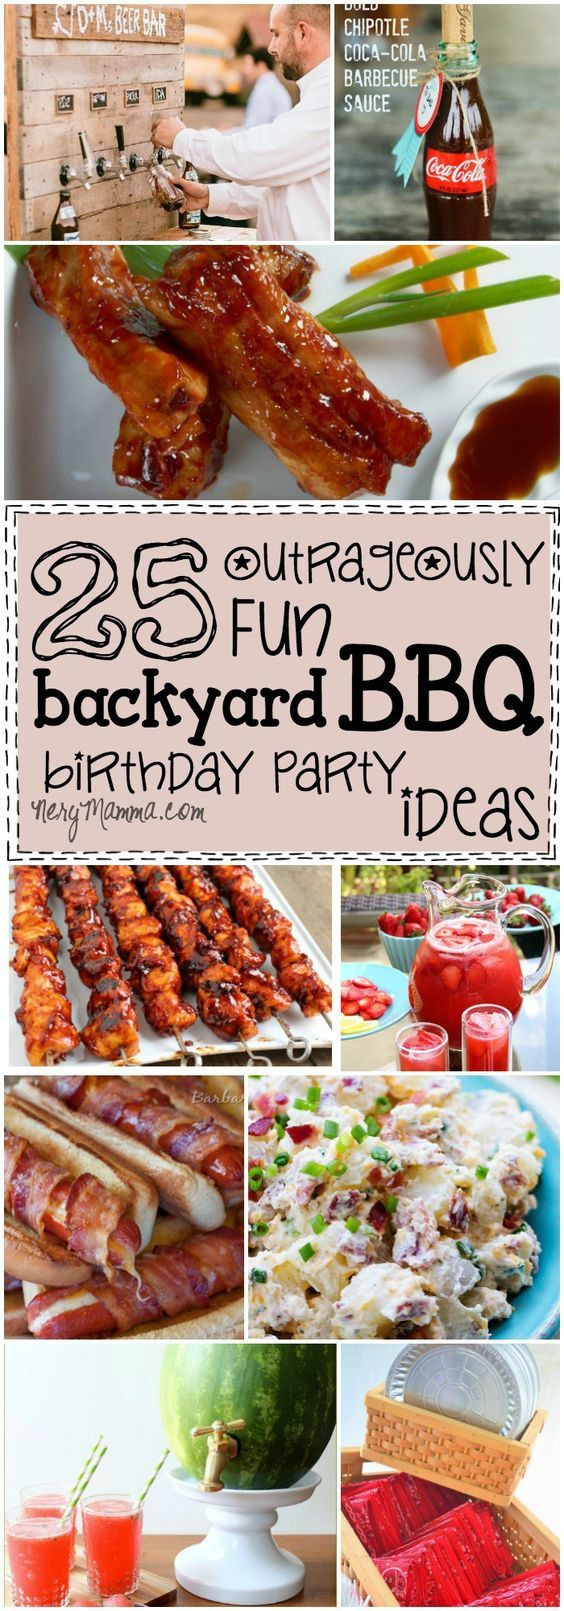 Bbq Birthday Party Ideas For Adults
 25 Outrageously Fun Backyard BBQ Birthday Party Ideas